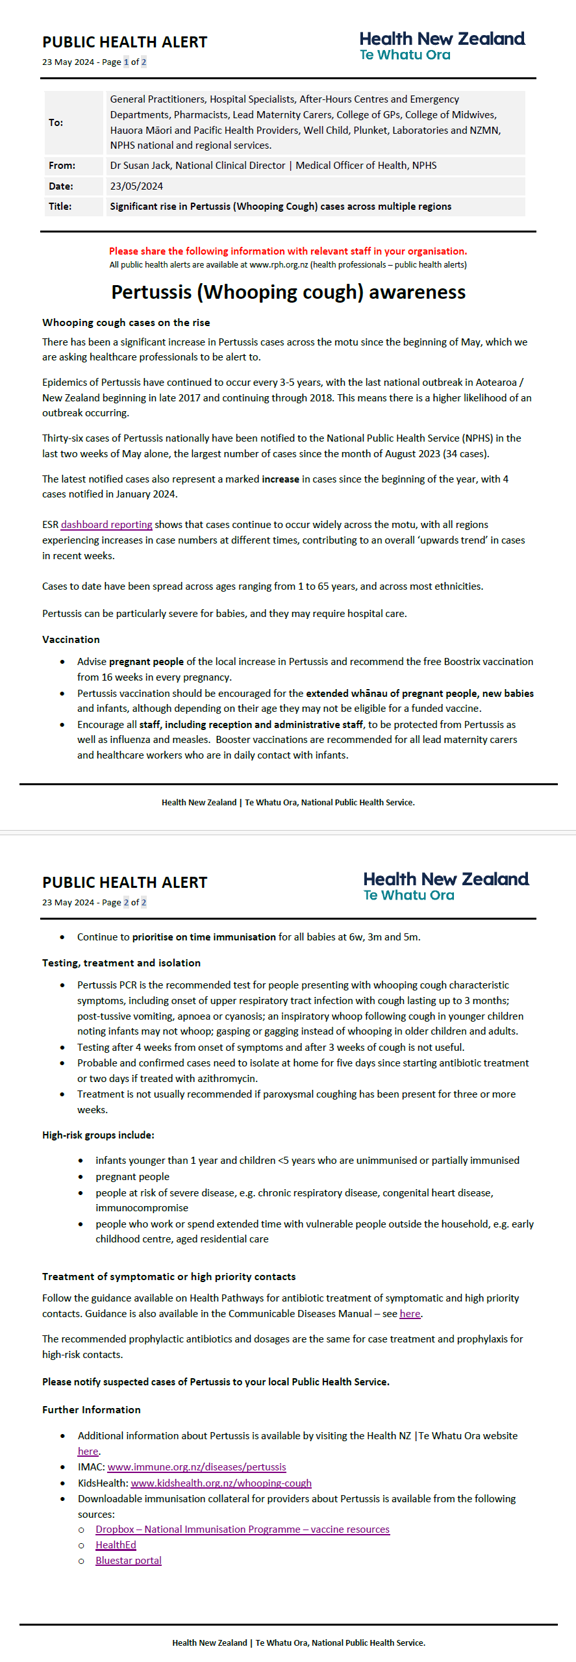 National Public Health alert - significant rise in Pertussis (Whooping cough) cases across multiple regions